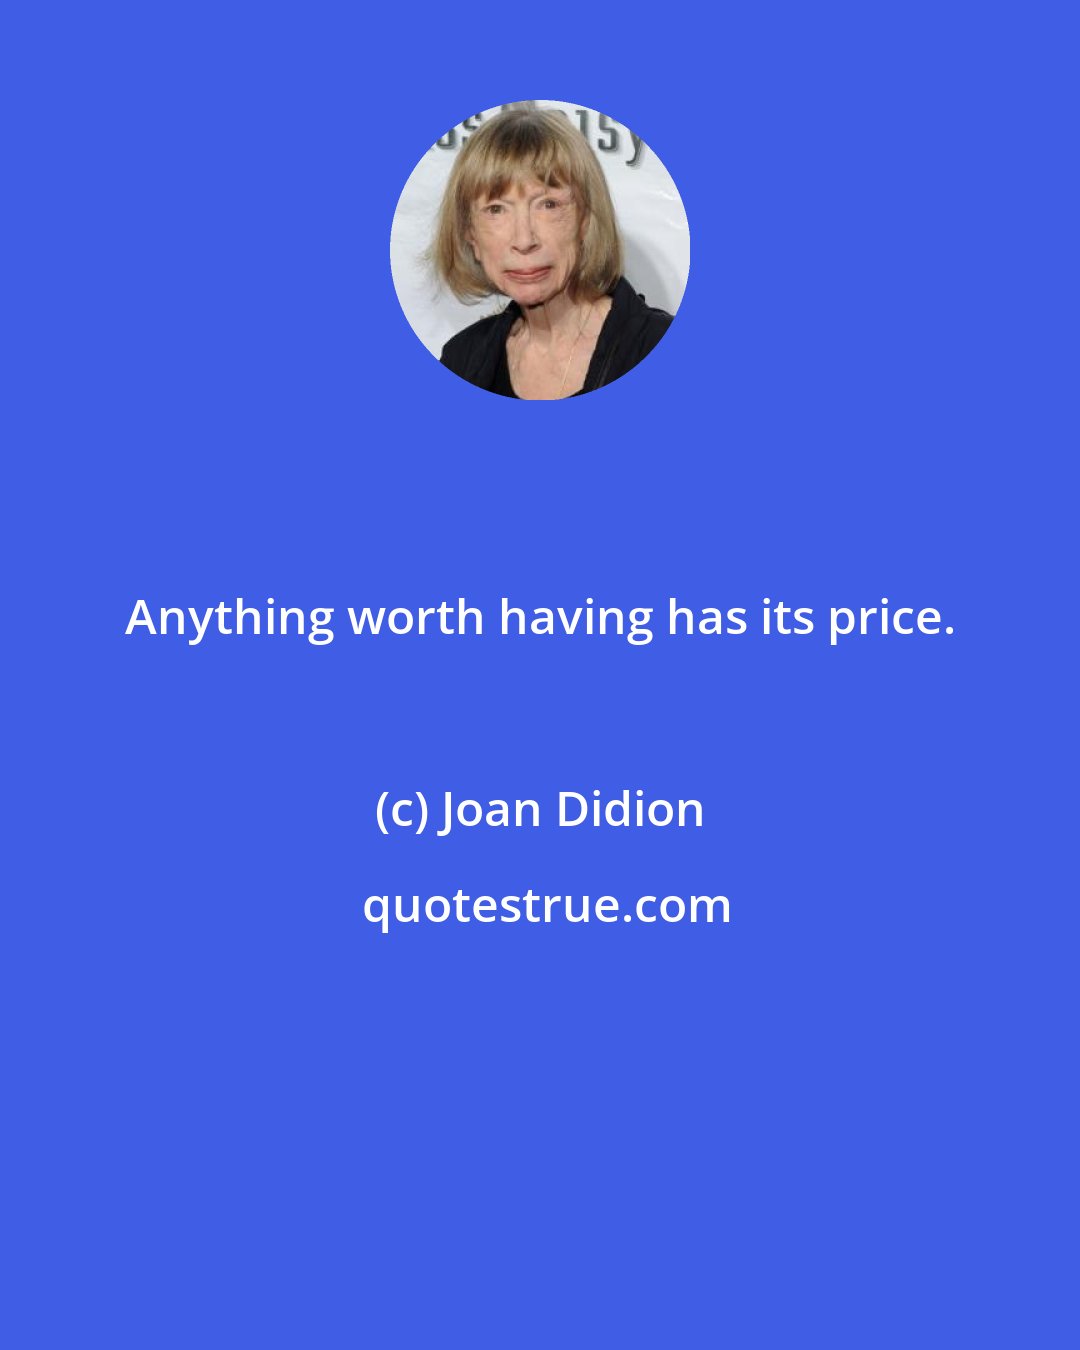 Joan Didion: Anything worth having has its price.